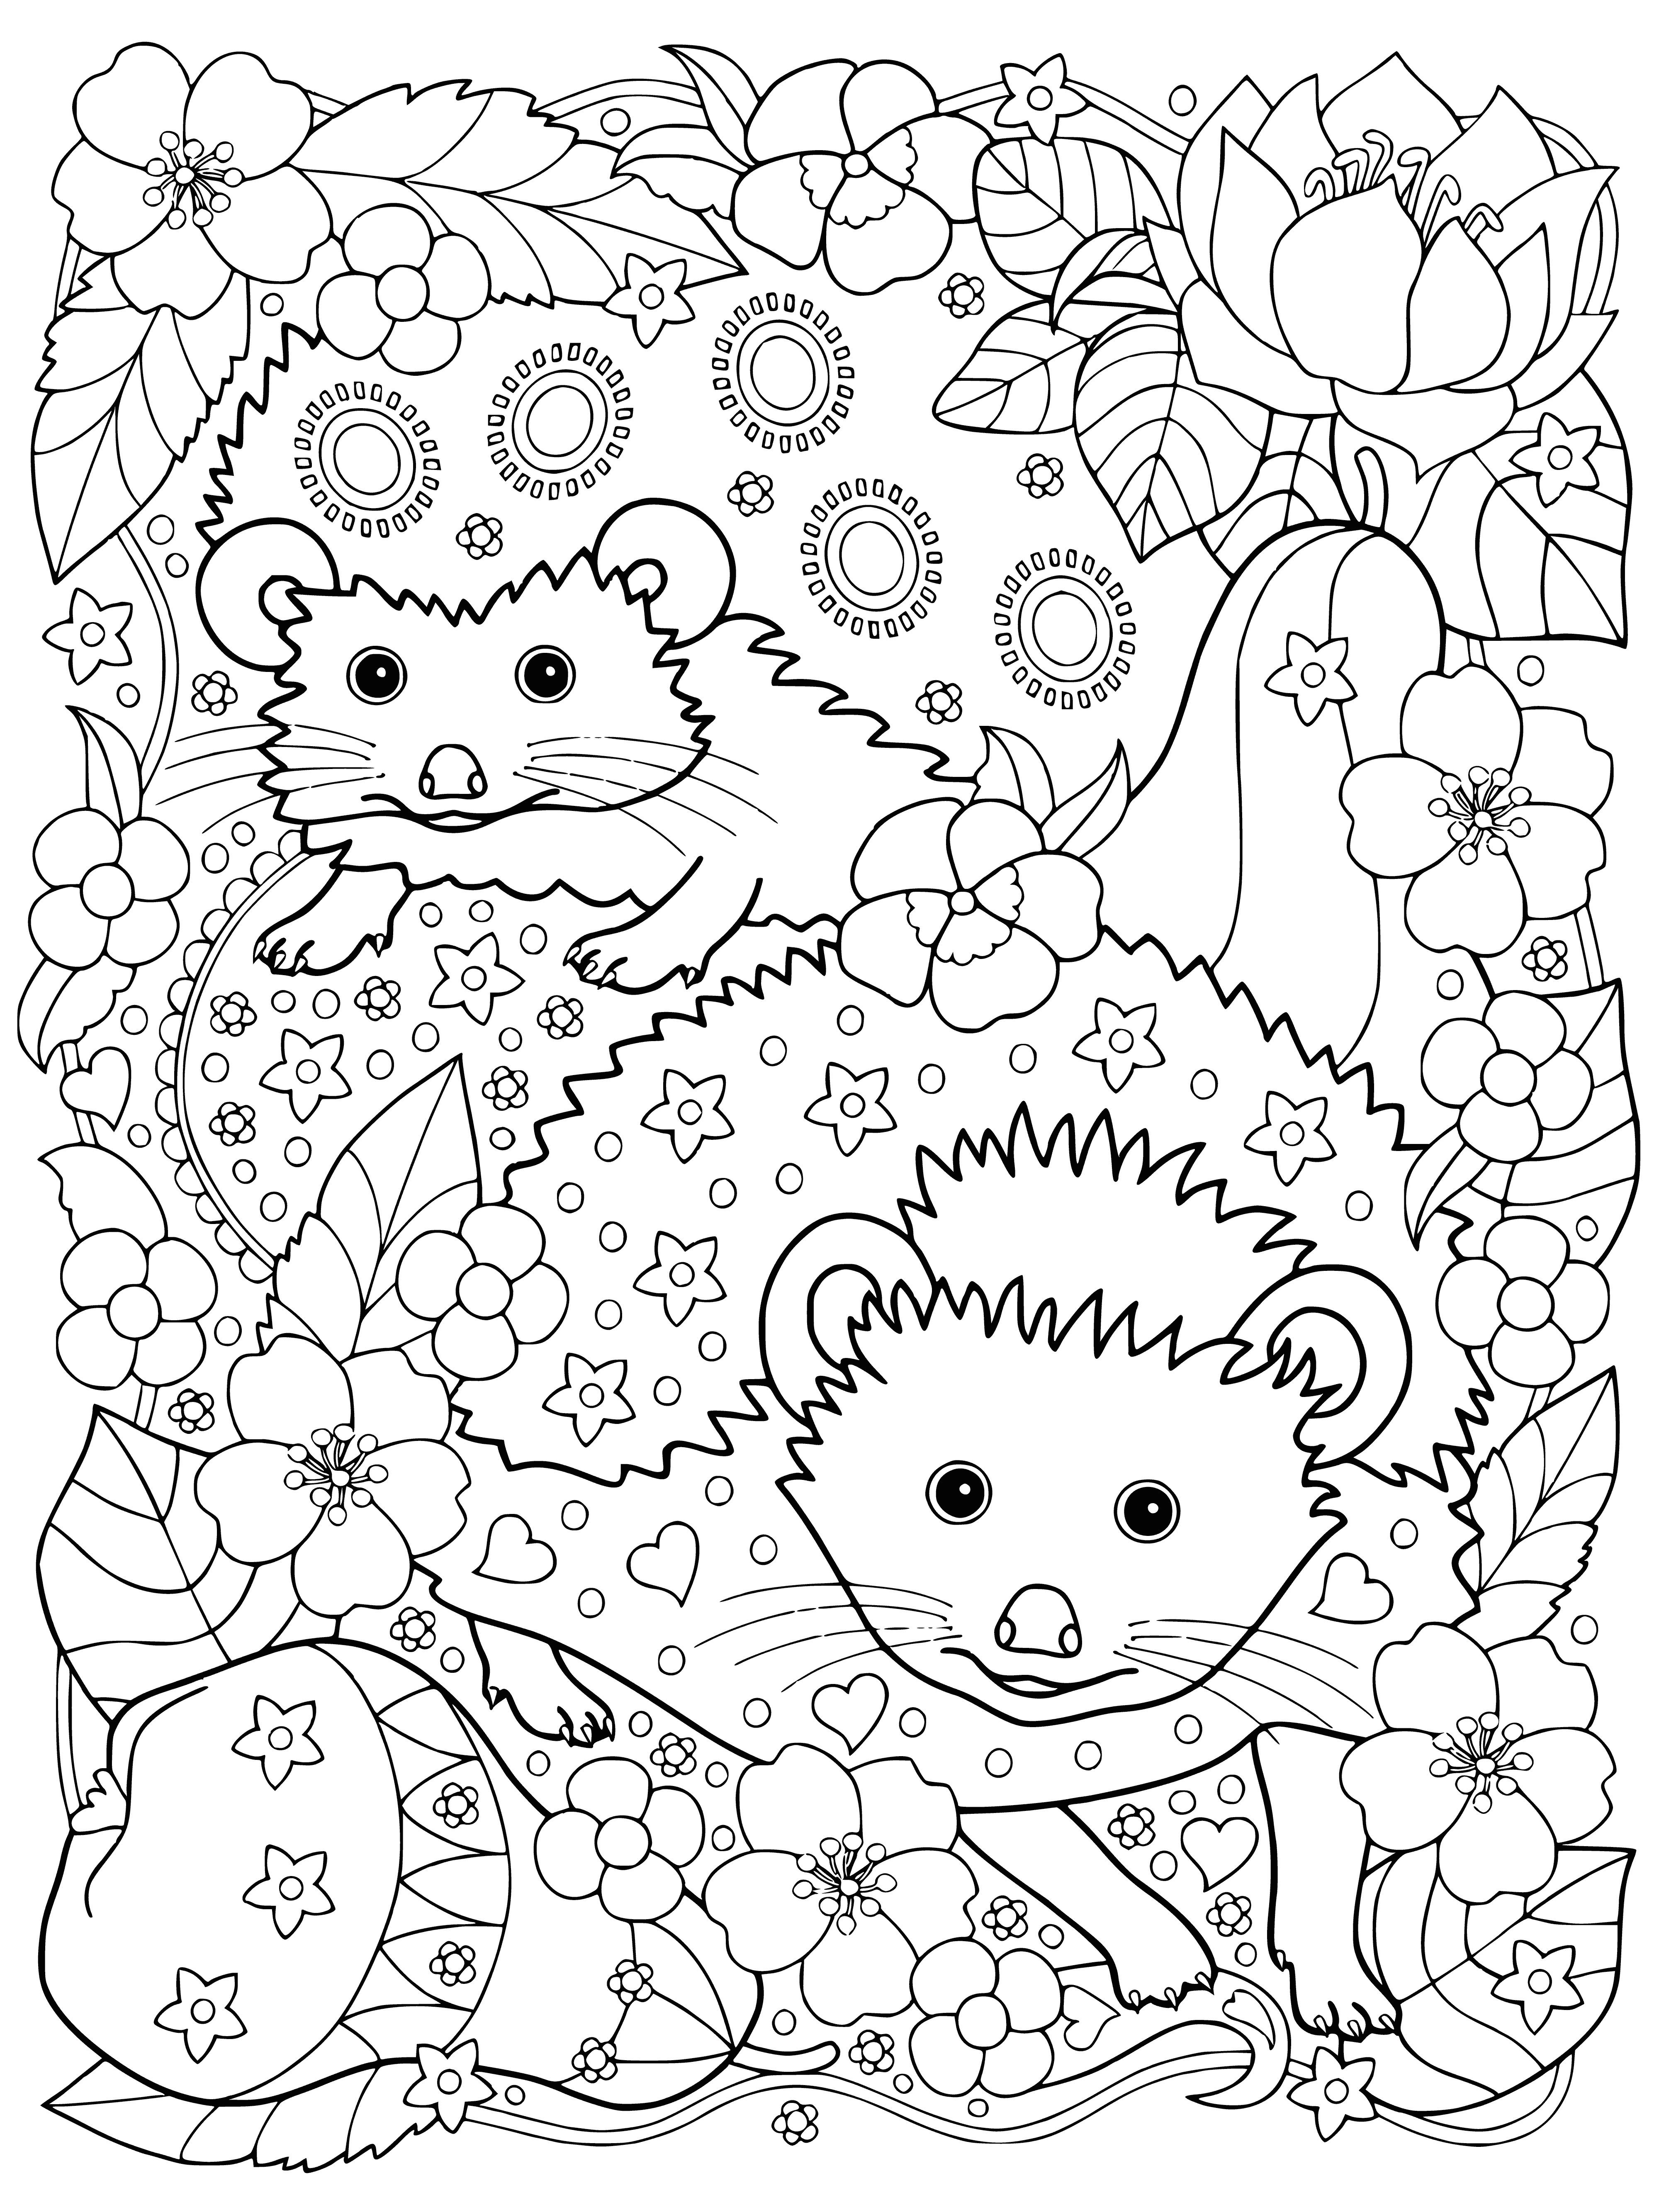 coloring page: Cute and unique hedgehogs have spines and short fur, a small face, and are nocturnal.